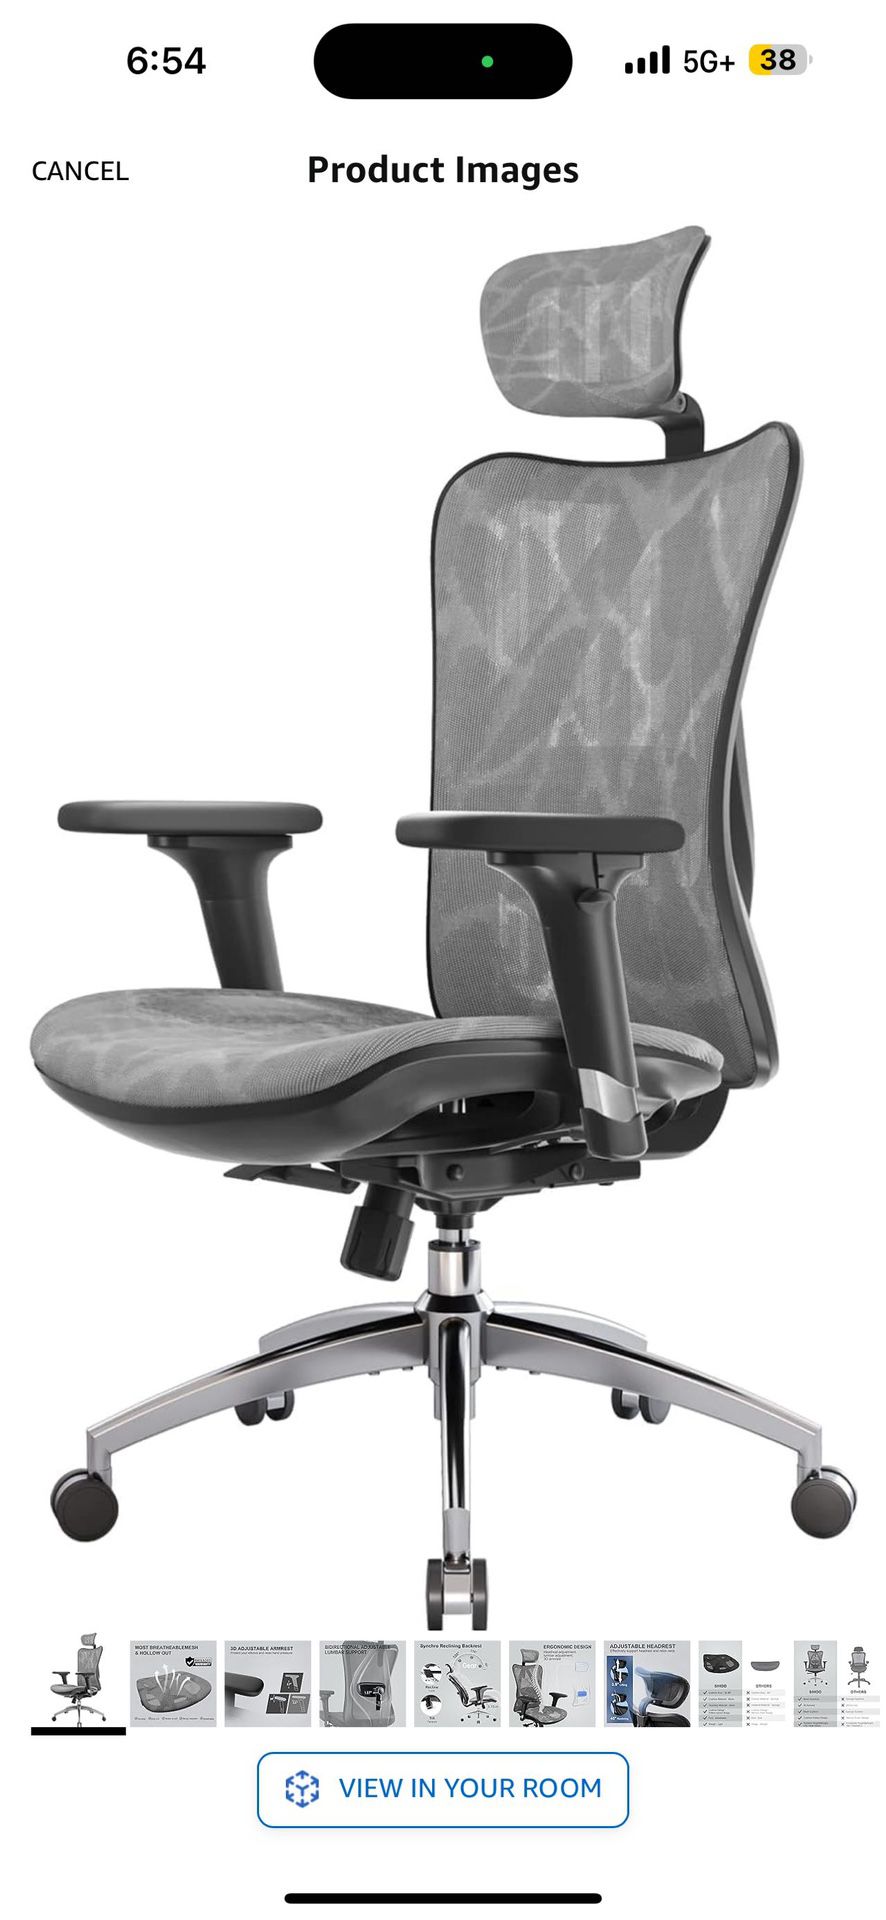 SIHOO M57 Ergonomic Office Chair with 3 Way Armrests Lumbar Support and Adjustable Headrest High Back Tilt Function Grey